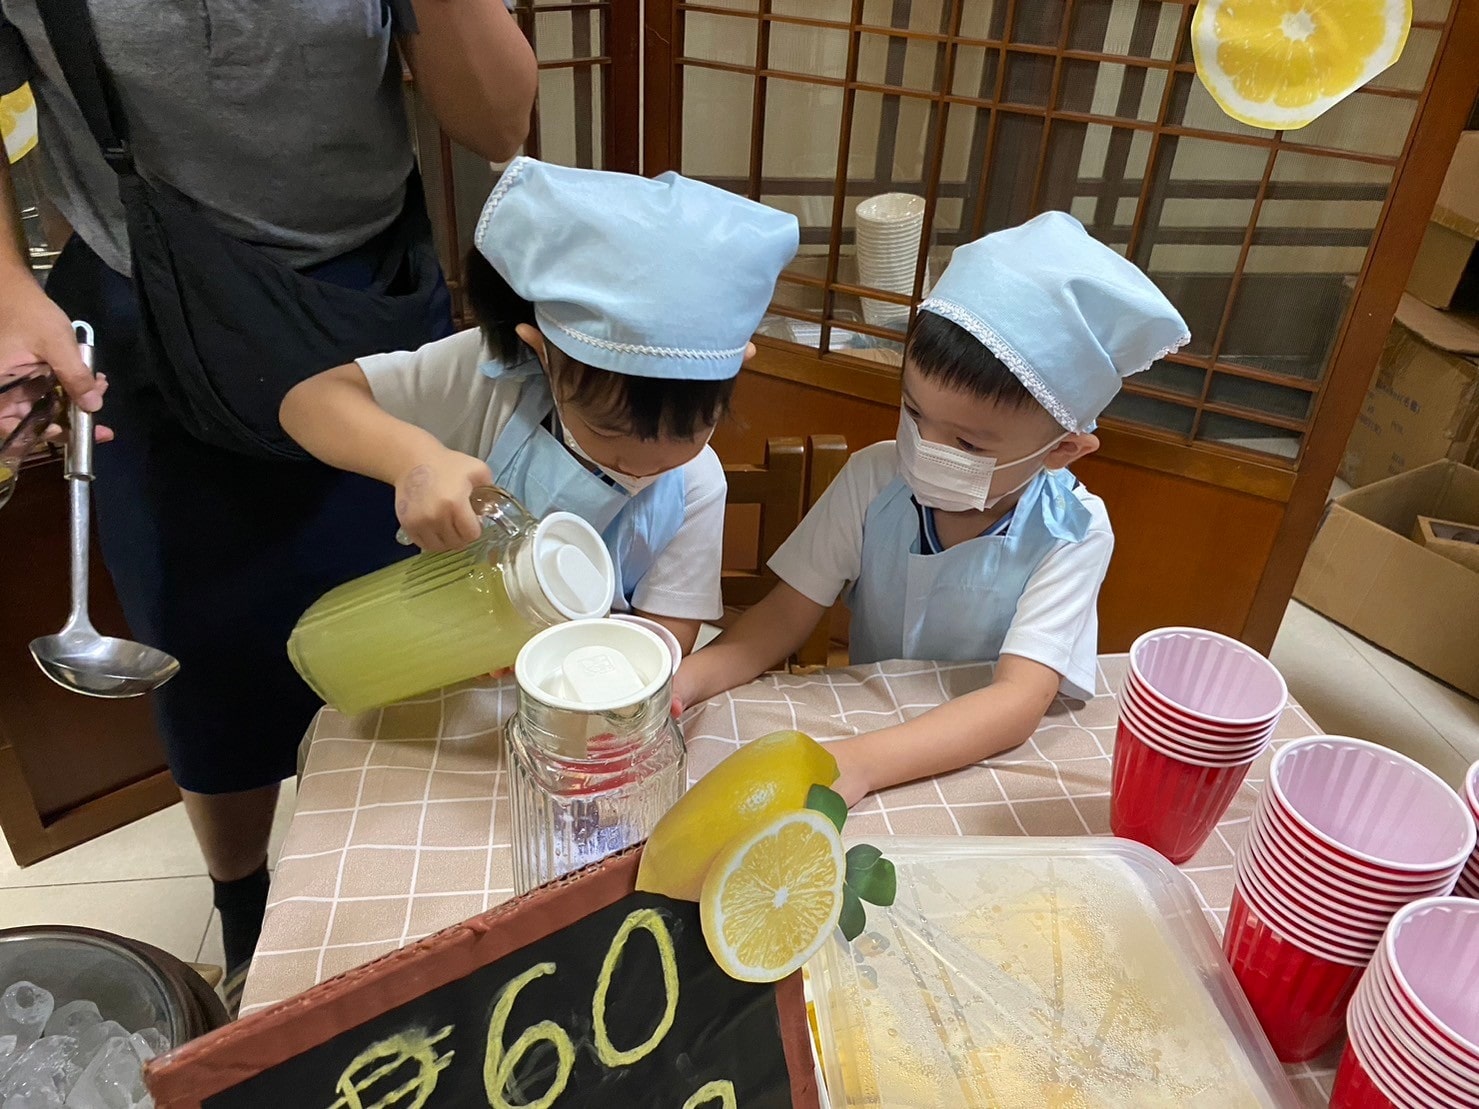 To quench thirst and give refreshment, lemon drinks are also available at the kiddie market.【Photo by Matt Serrano】